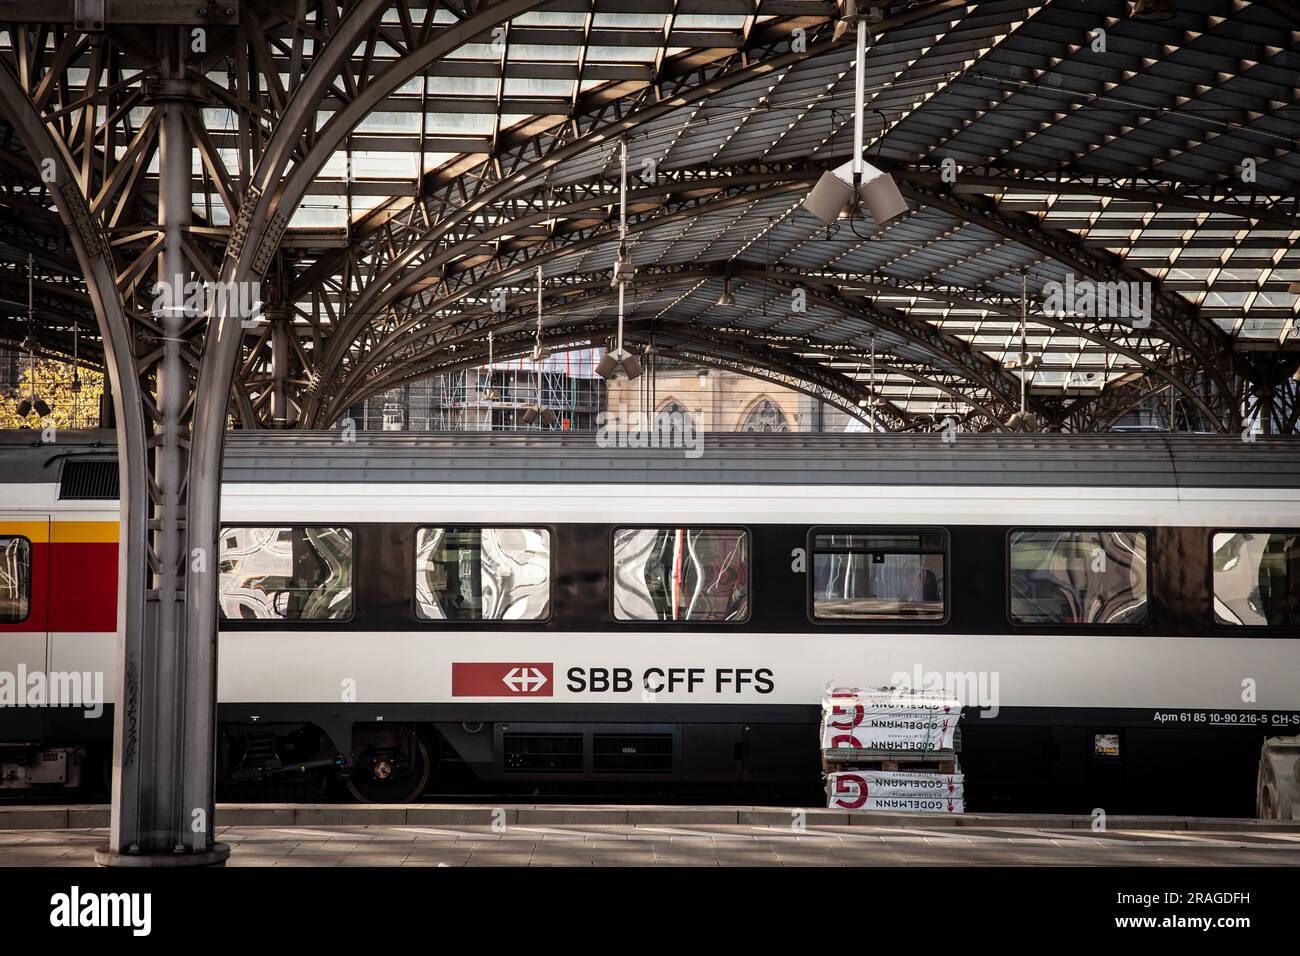 Picture of a train with the logo of SBB CFF FFS in Cologne train station. Swiss Federal Railways, or SBB CFF FFS is the national railway company of Sw Stock Photo